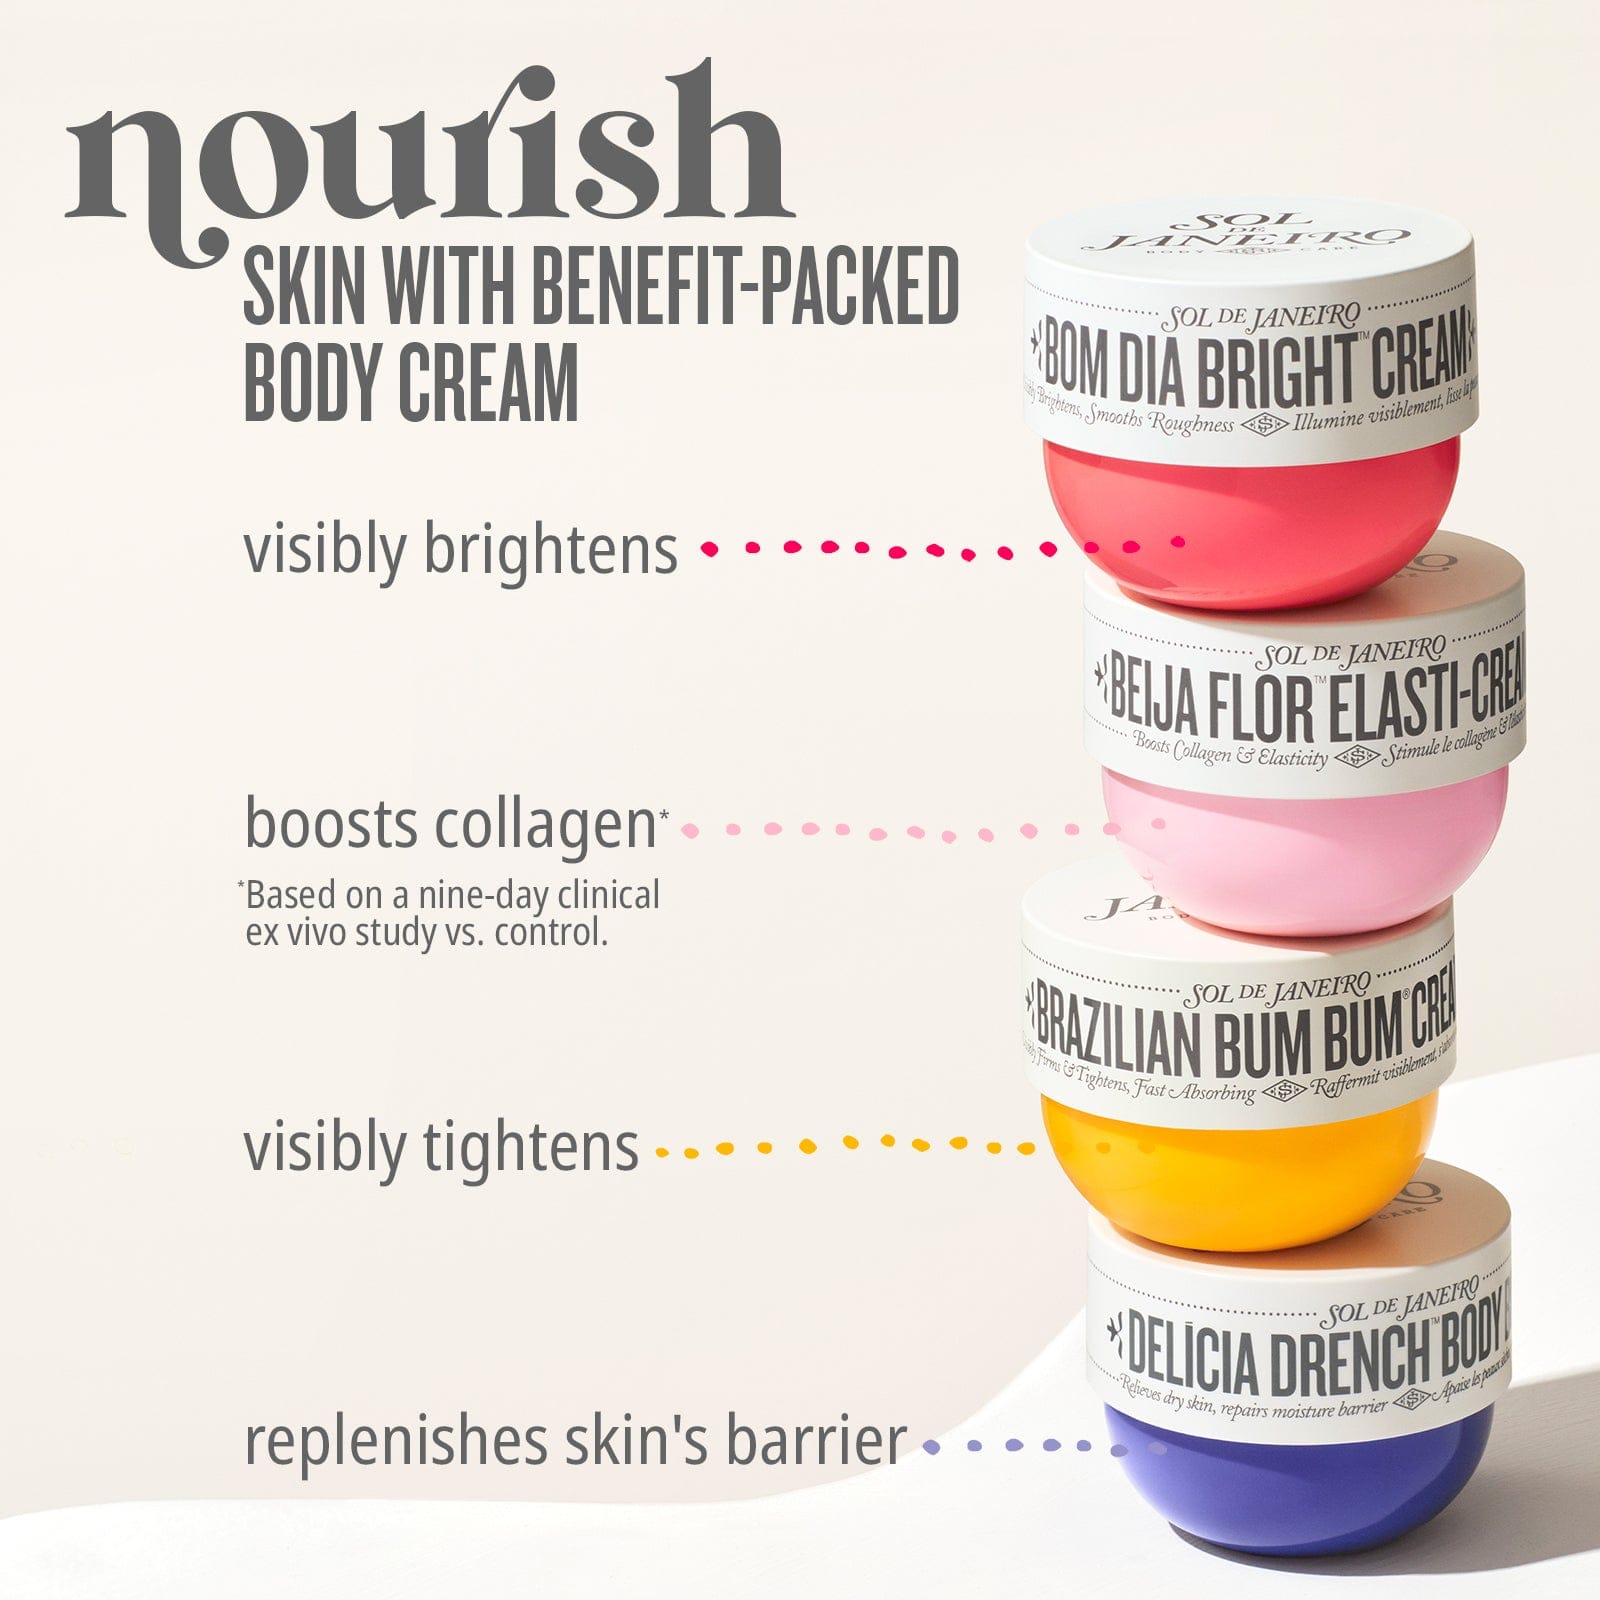 Nourish skin with benefit-packed body cream: visibly brightens, boosts collagen, visibly tightens, replenishes skin&